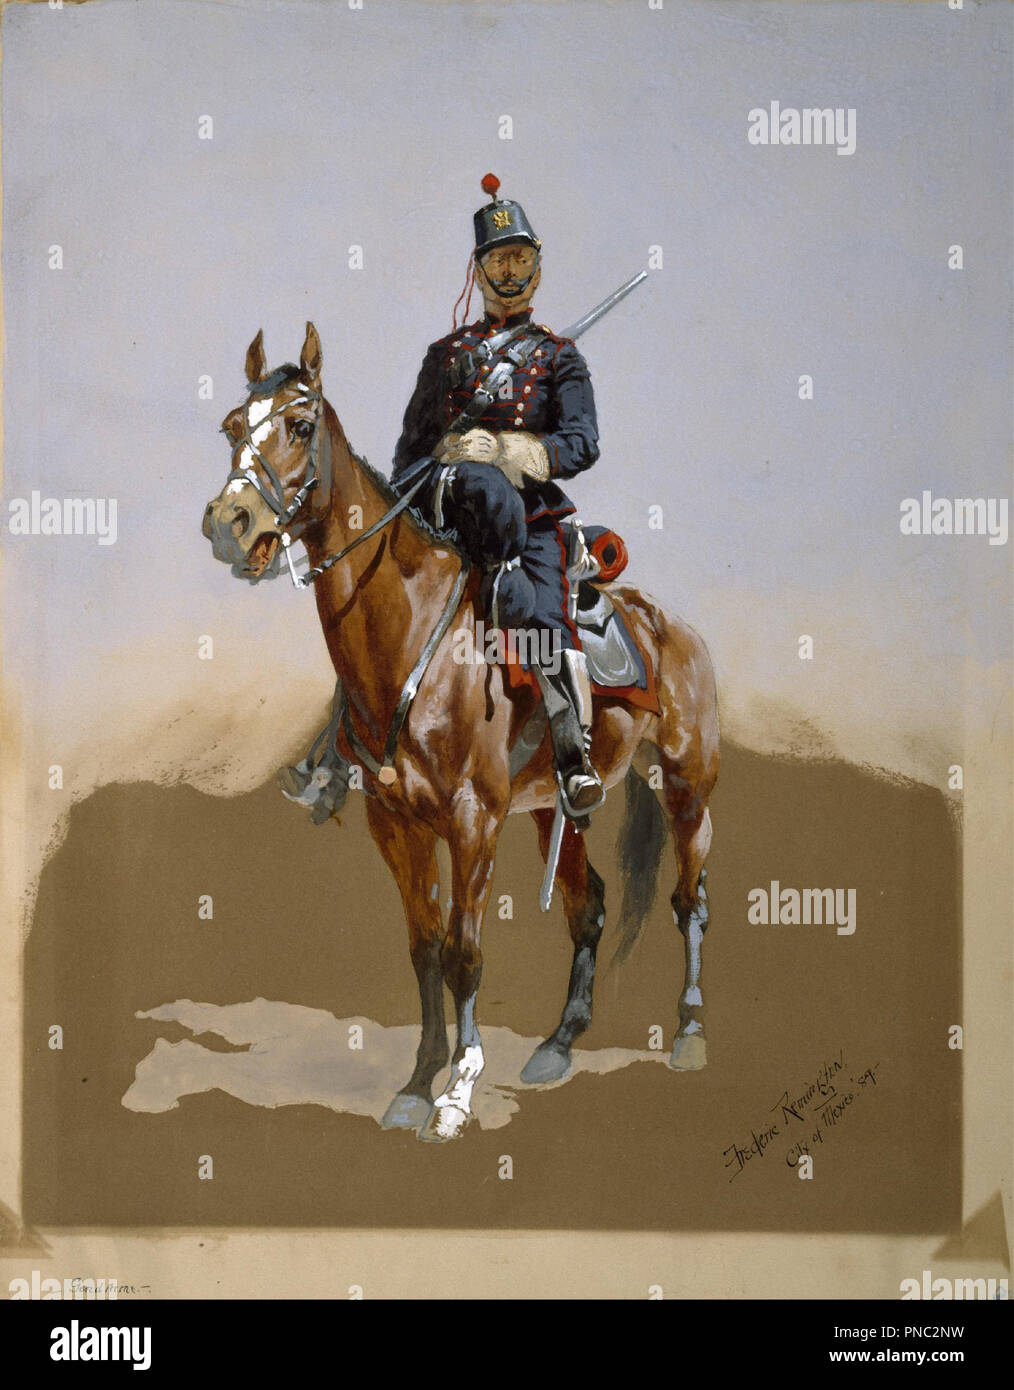 The Gendarme. Date/Period: 1889. Watercolor, ink, and gouache on paper. Width: 35.9 cm. Height: 45.7 cm (sheet). Author: Frederic Remington. Stock Photo